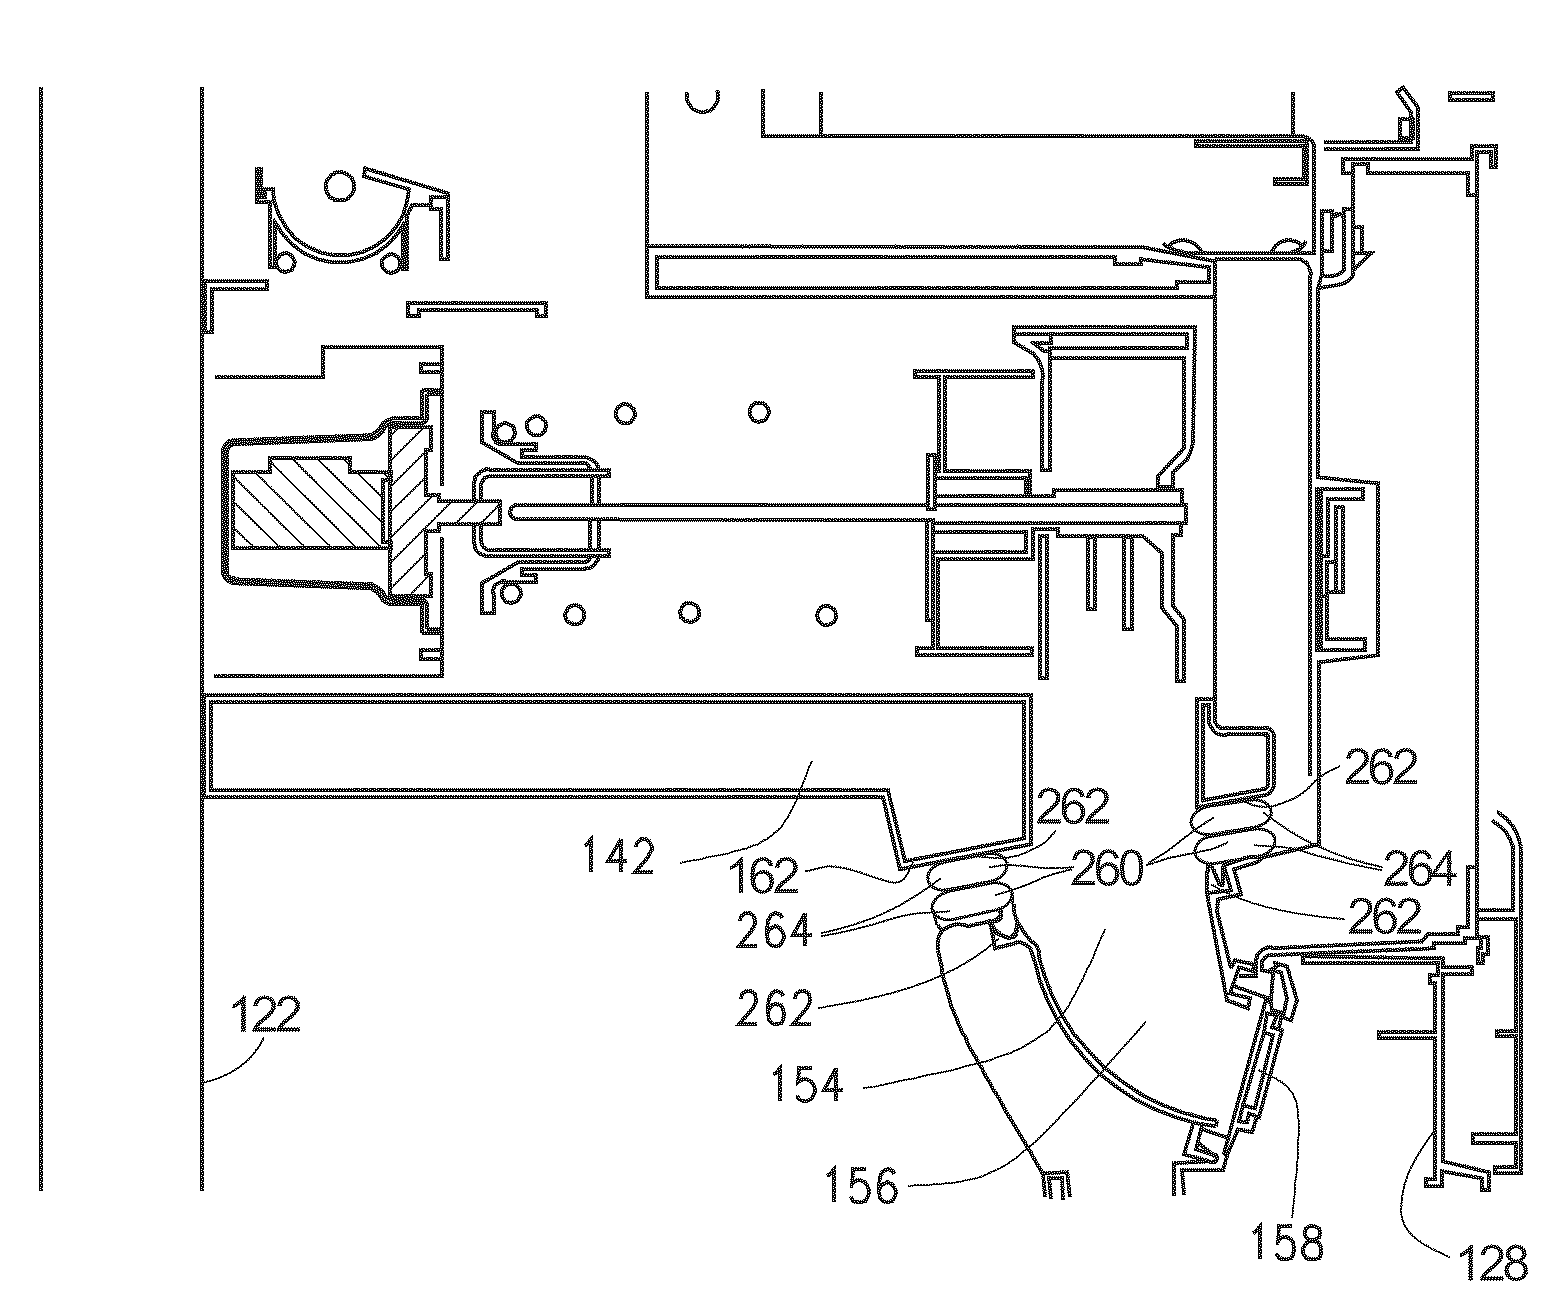 Ice-dispensing assembly mounted within a refrigerator compartment